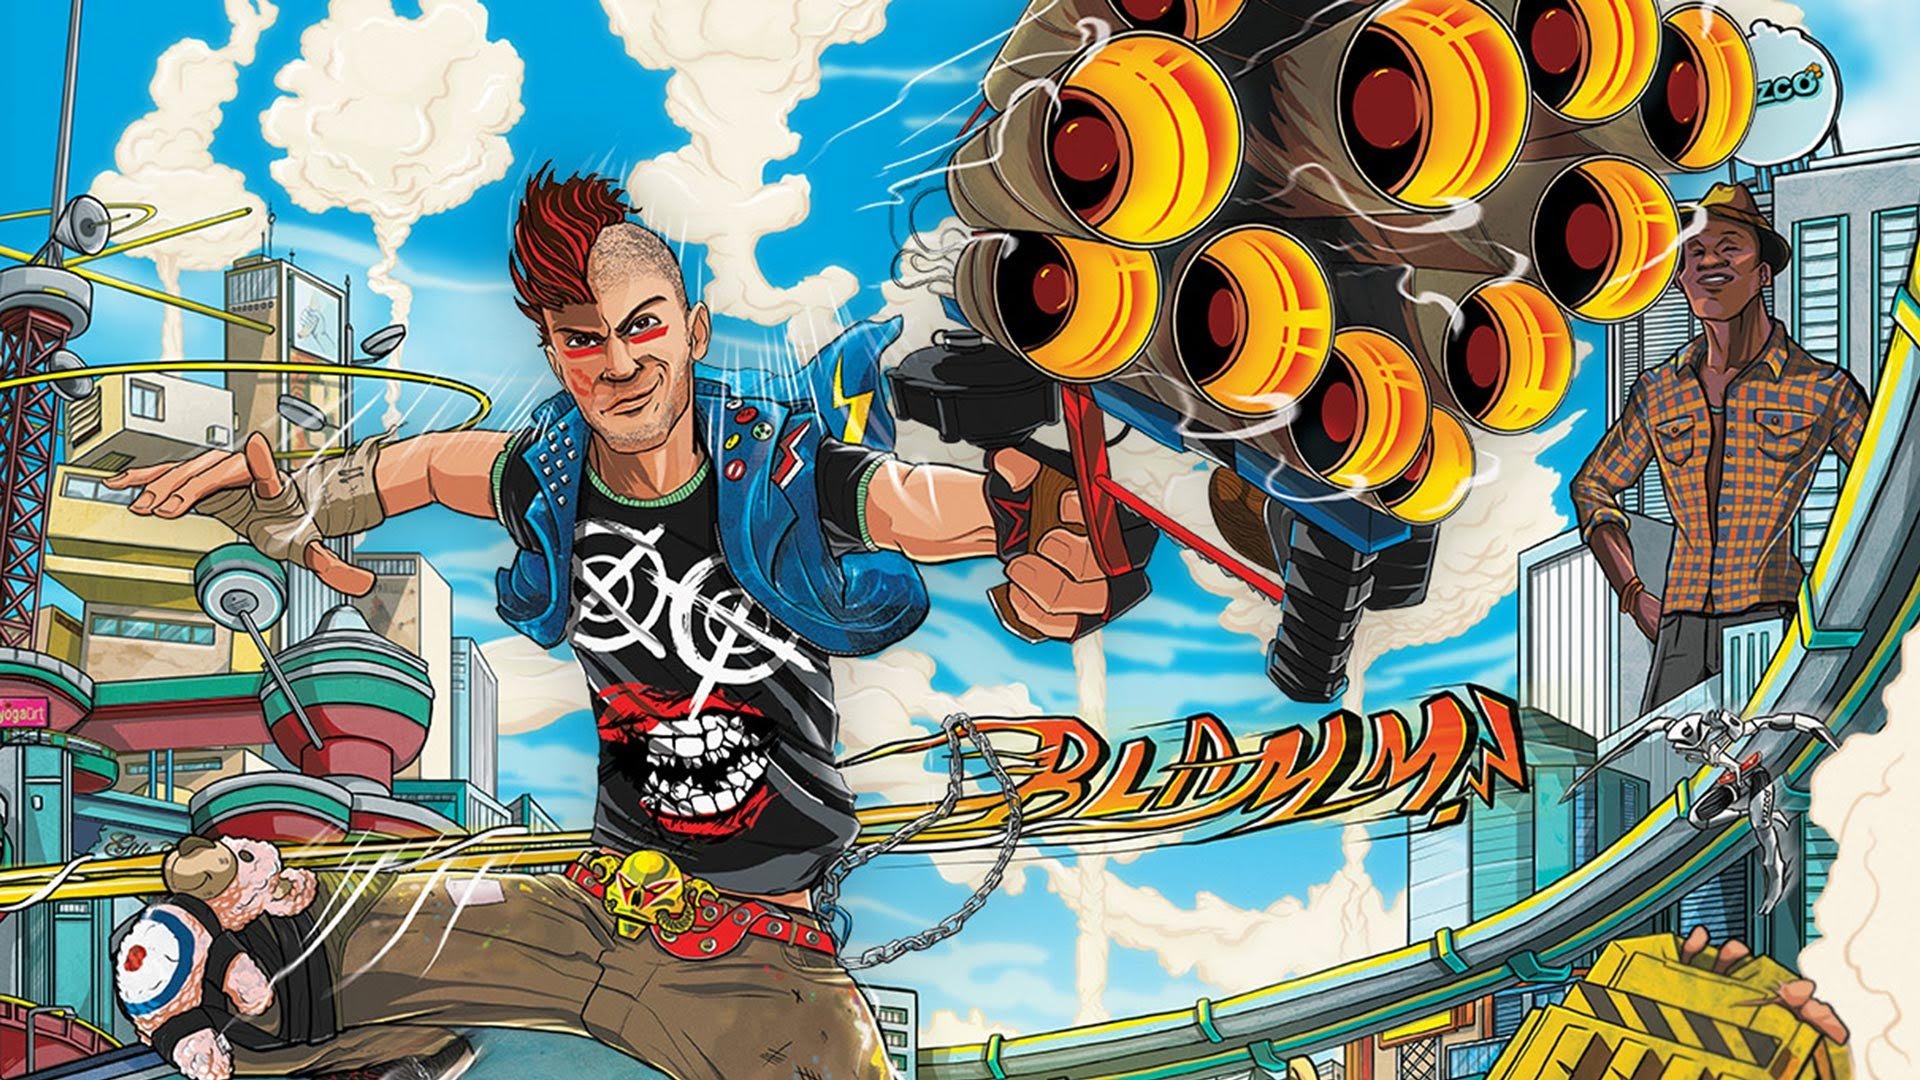 Xbox Games With Gold de abril inclui Sunset Overdrive e The Wolf Among Us -  NerdBunker